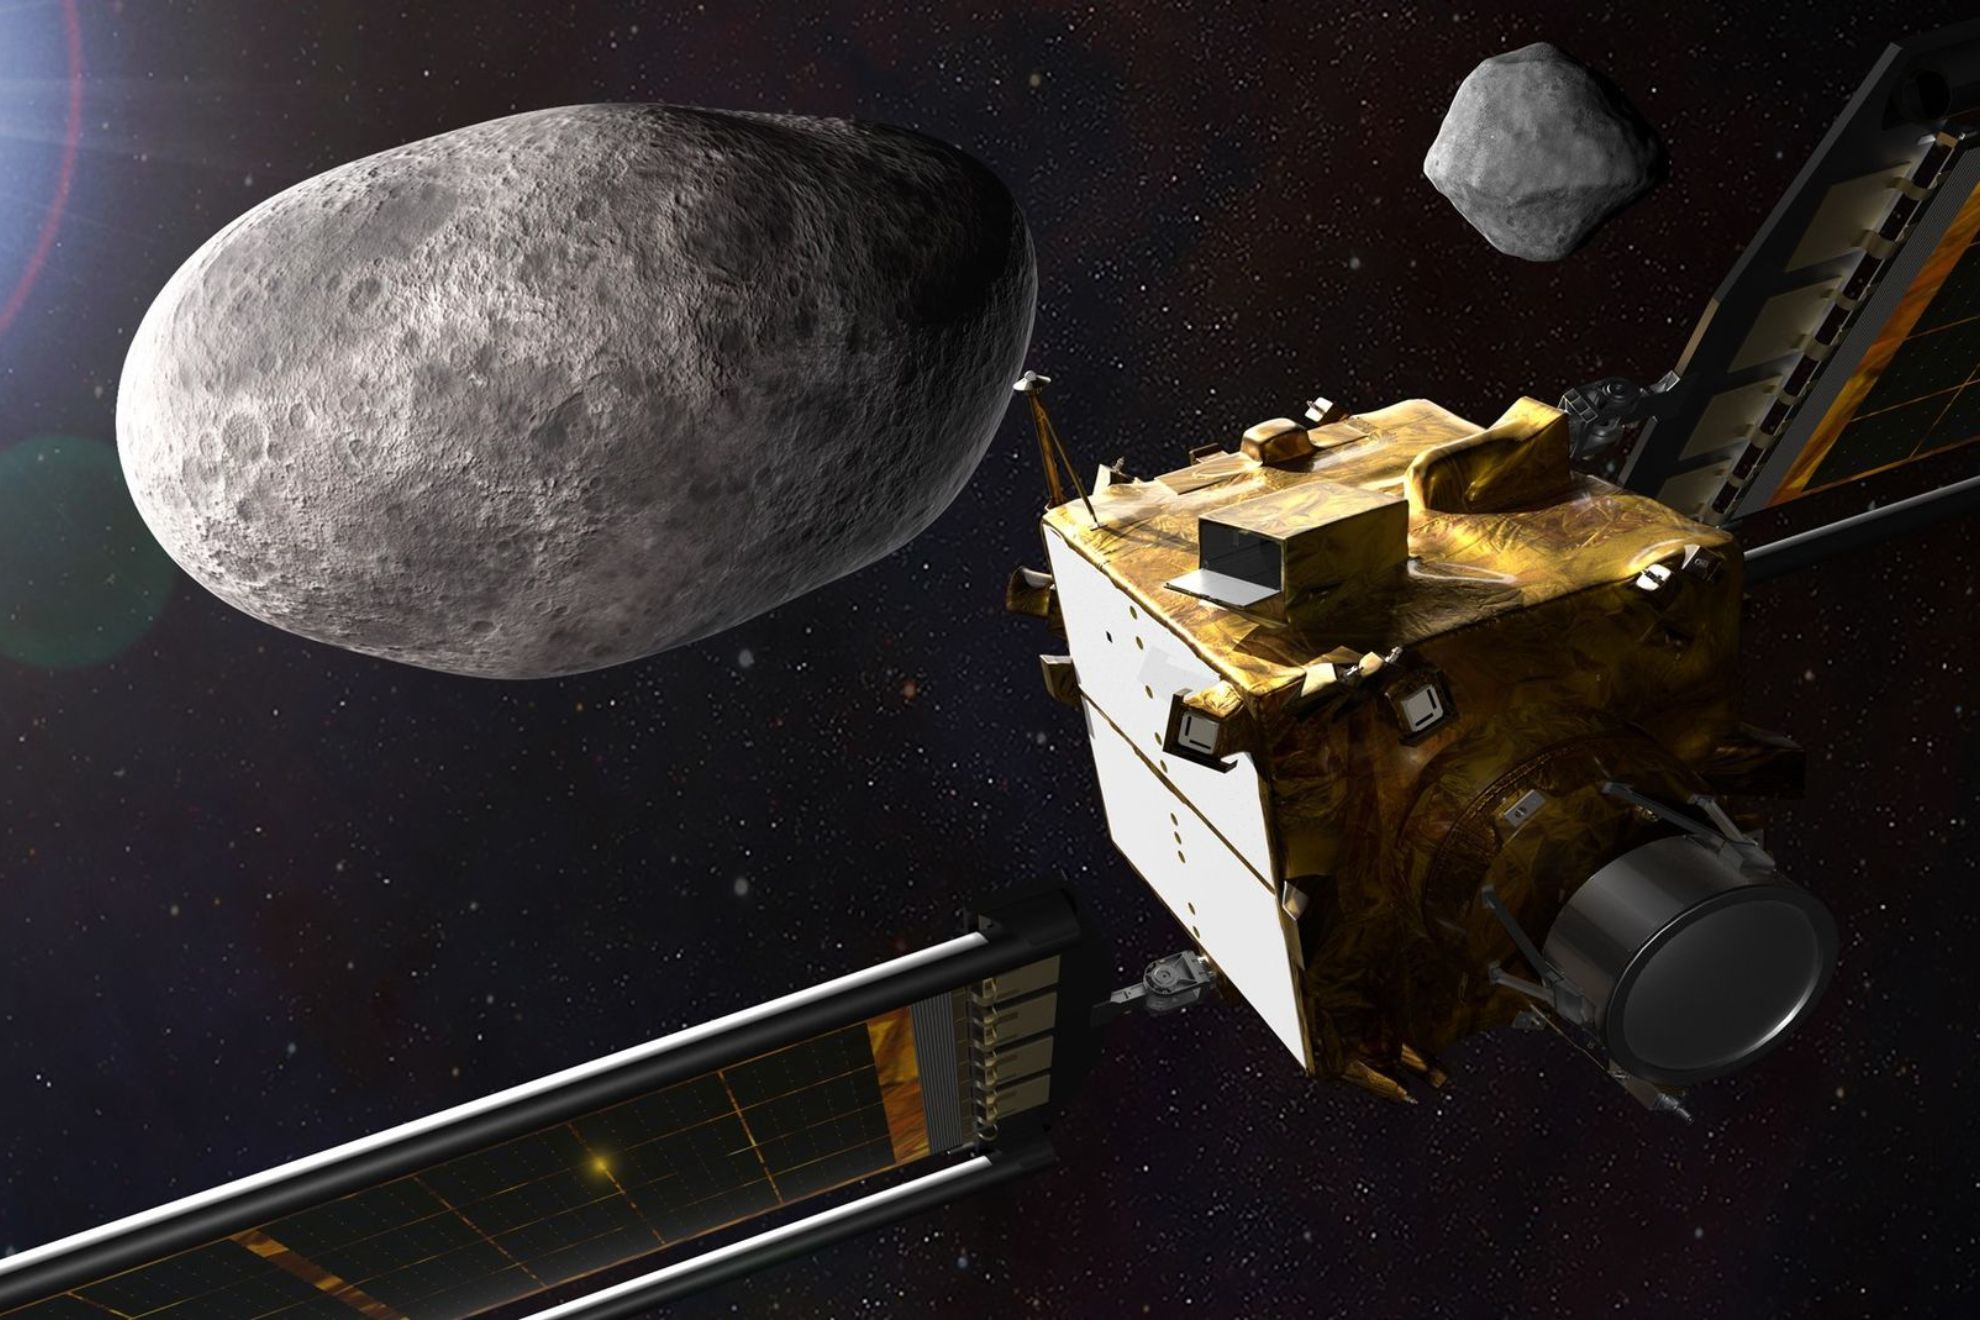 NASA will intentionally crash a spacecraft into asteroid to save Earth from deadly impact